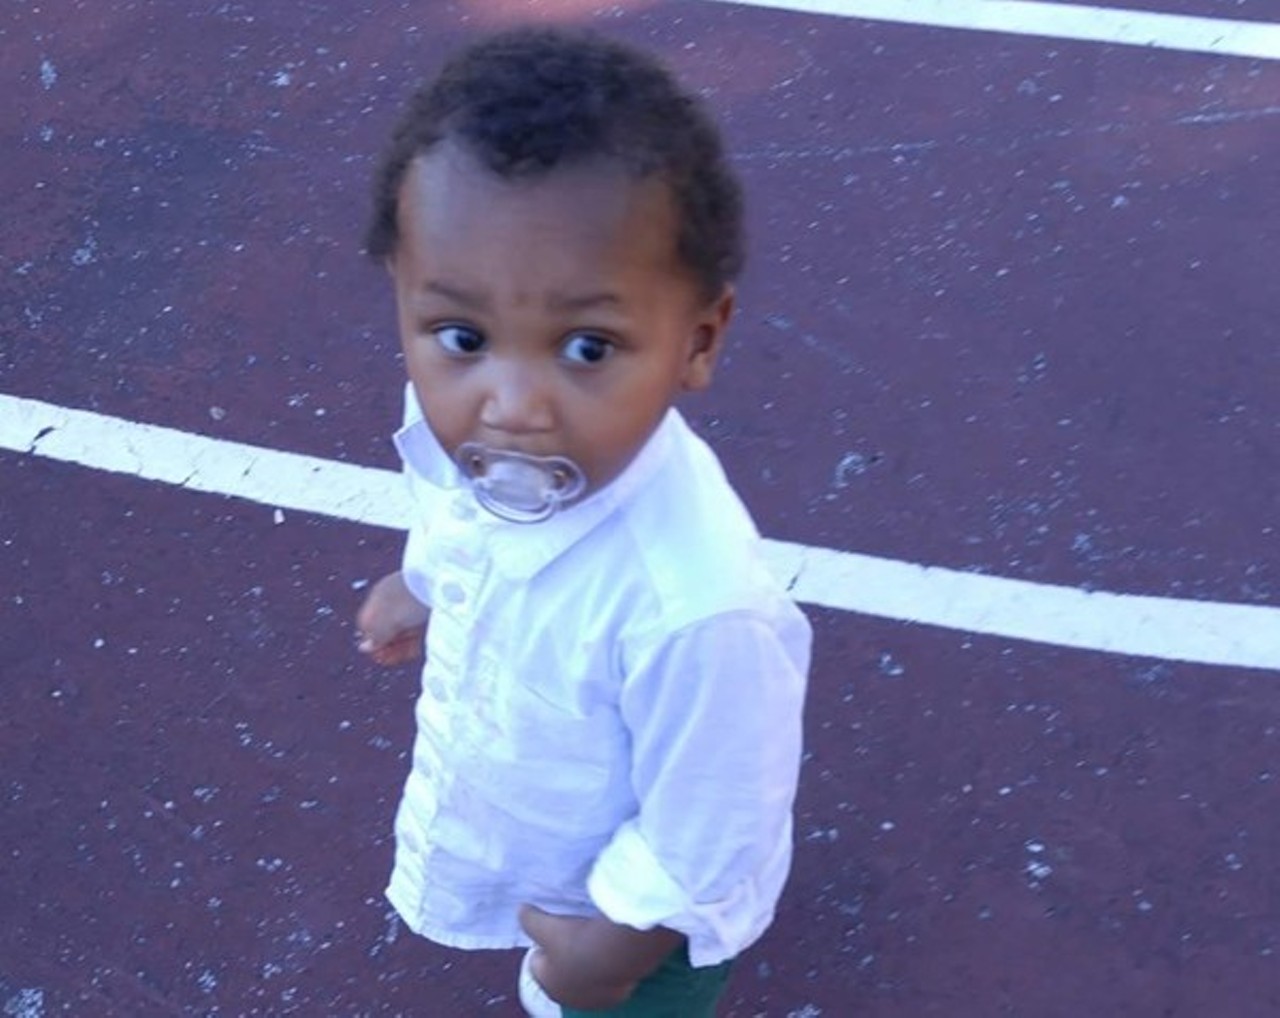 Man killed baby while trying to shoot the child's mother
Eight-month-old Reign Crockett was killed when his father fired a shot at his mother, who was fleeing the car he drove through north city. Two of Reign's brothers were still in the car as their father, Diata Crockett, drove away, leading to an Amber Alert. Diata Crockett later surrendered to police. Shown in the photo is two-year-old Rycker Crockett, who was with his father when he fled the murder scene but was later found unharmed. Image via SLMPD.